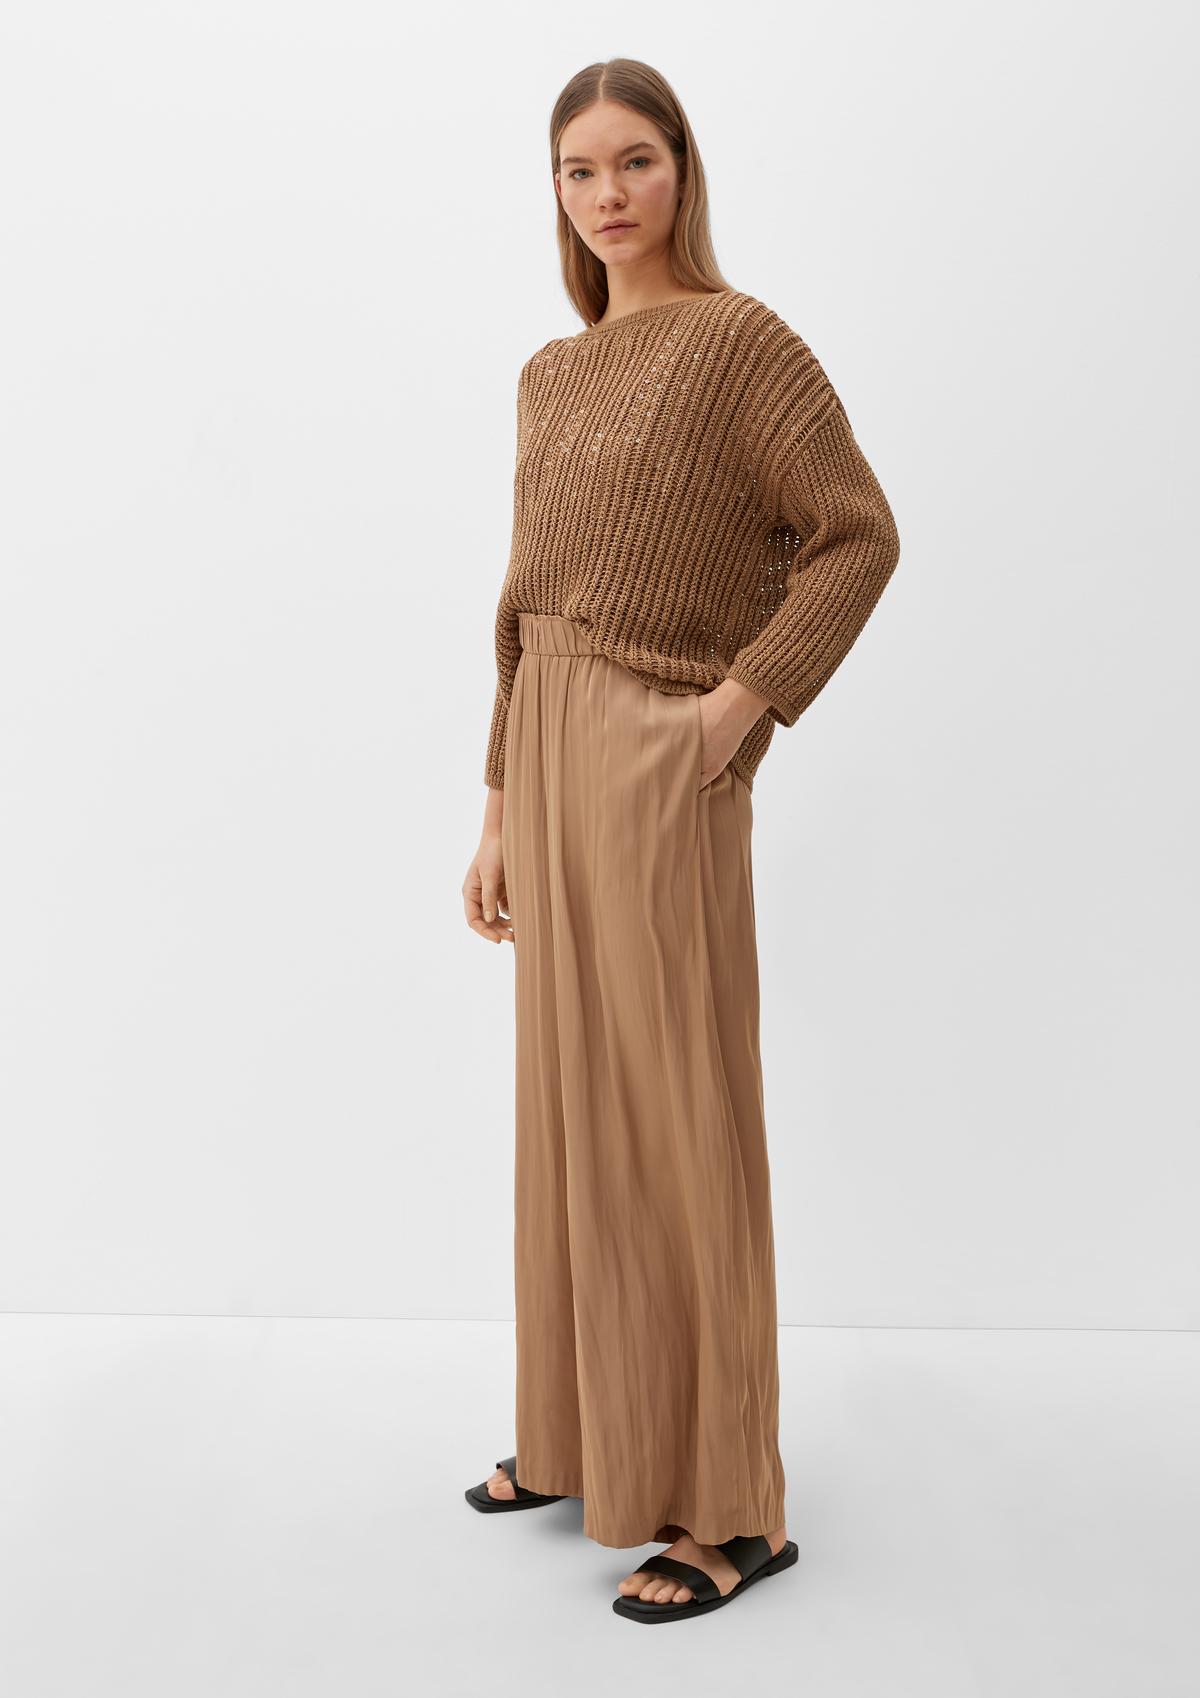 s.Oliver Knitted jumper with sequins